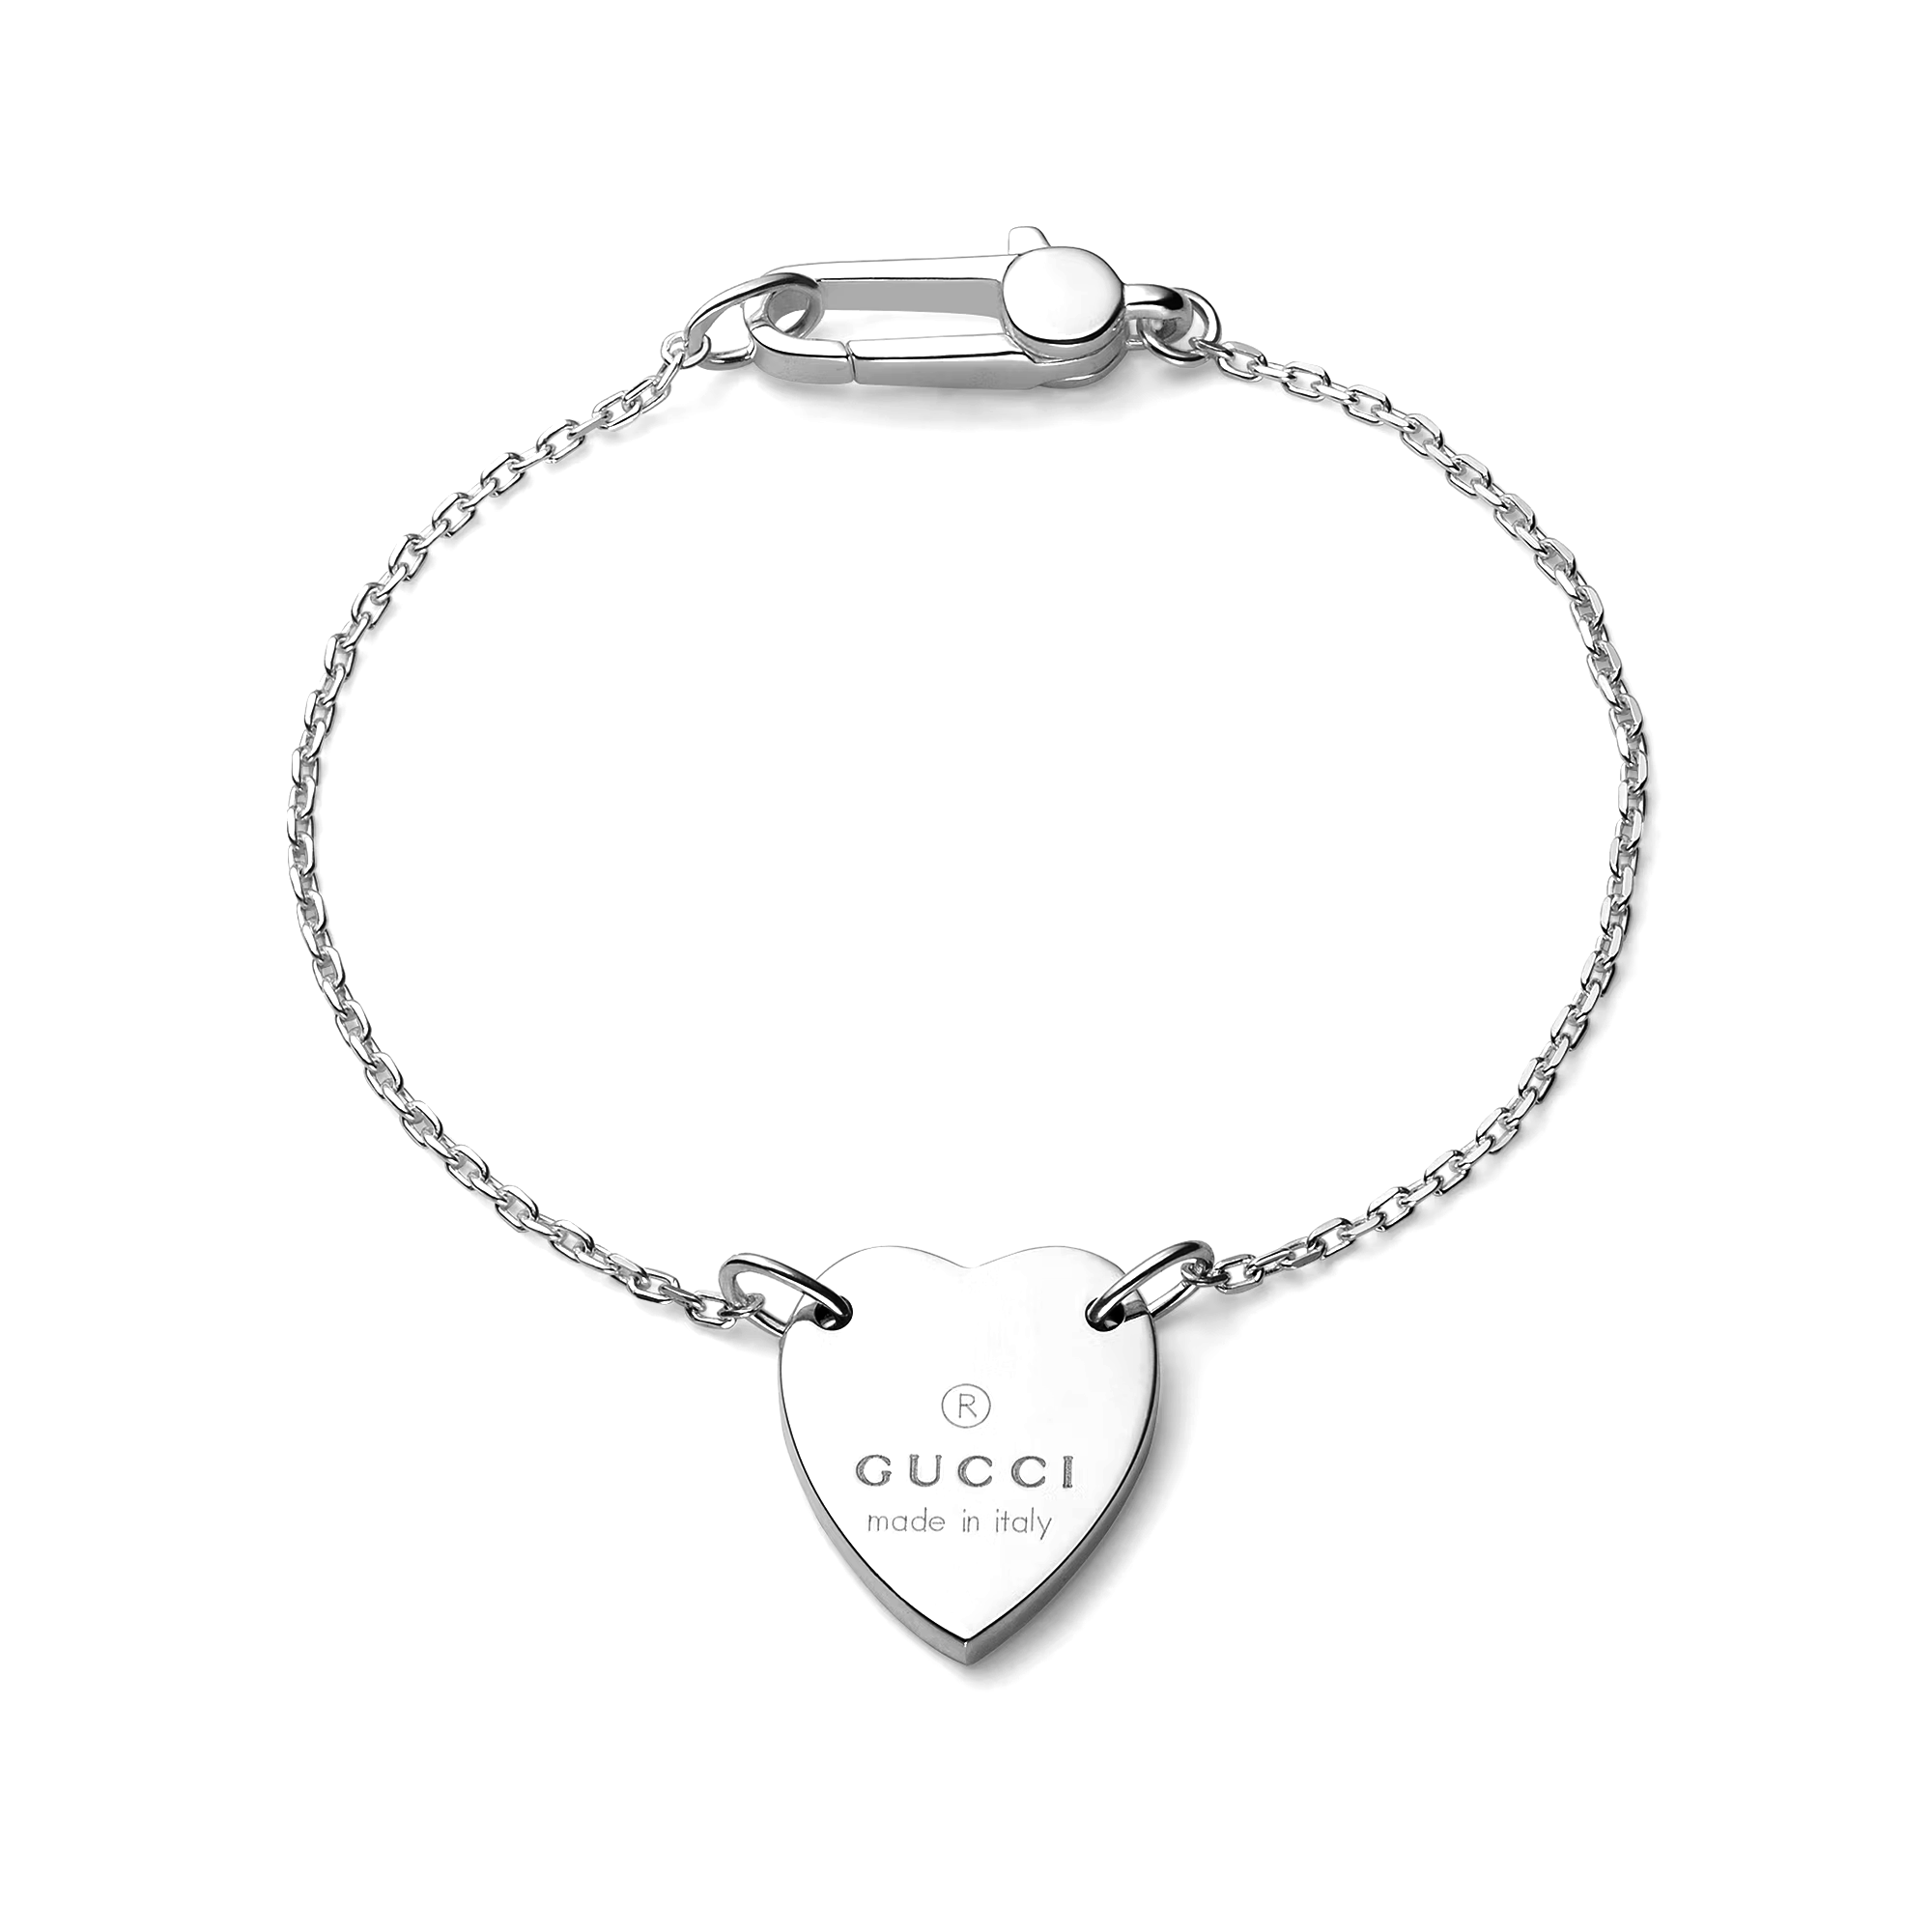 Trademark Sterling Silver Bracelet With Heart Charm